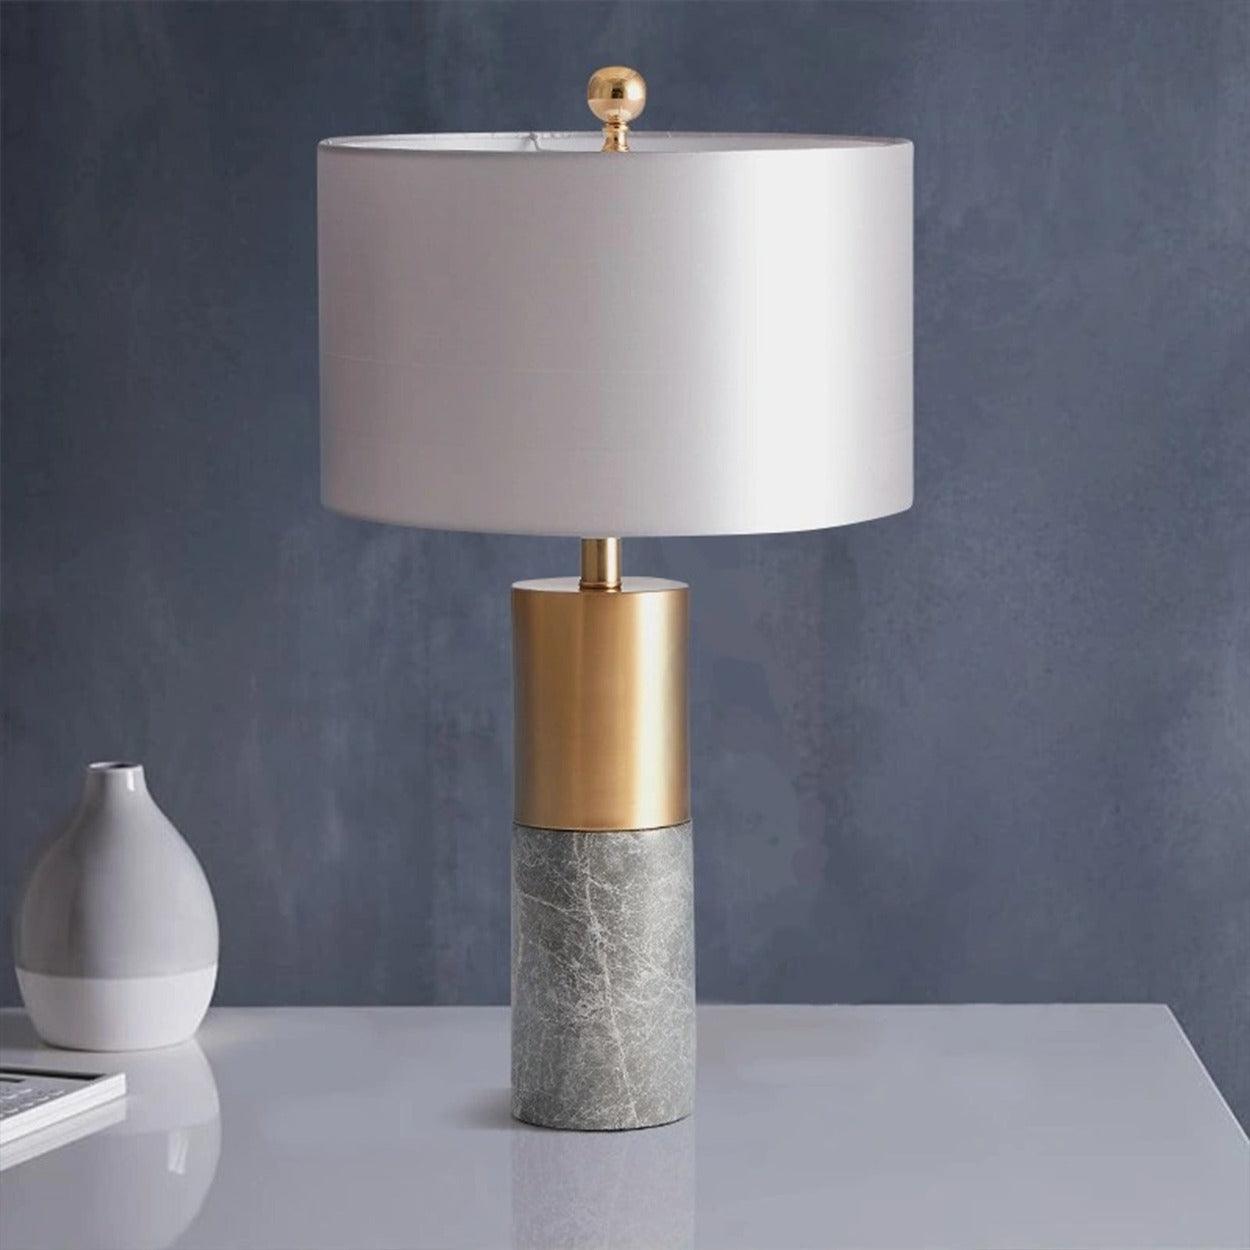 GOLD WITH MARBLE TEXTURE TABLE LAMP - Ankur Lighting